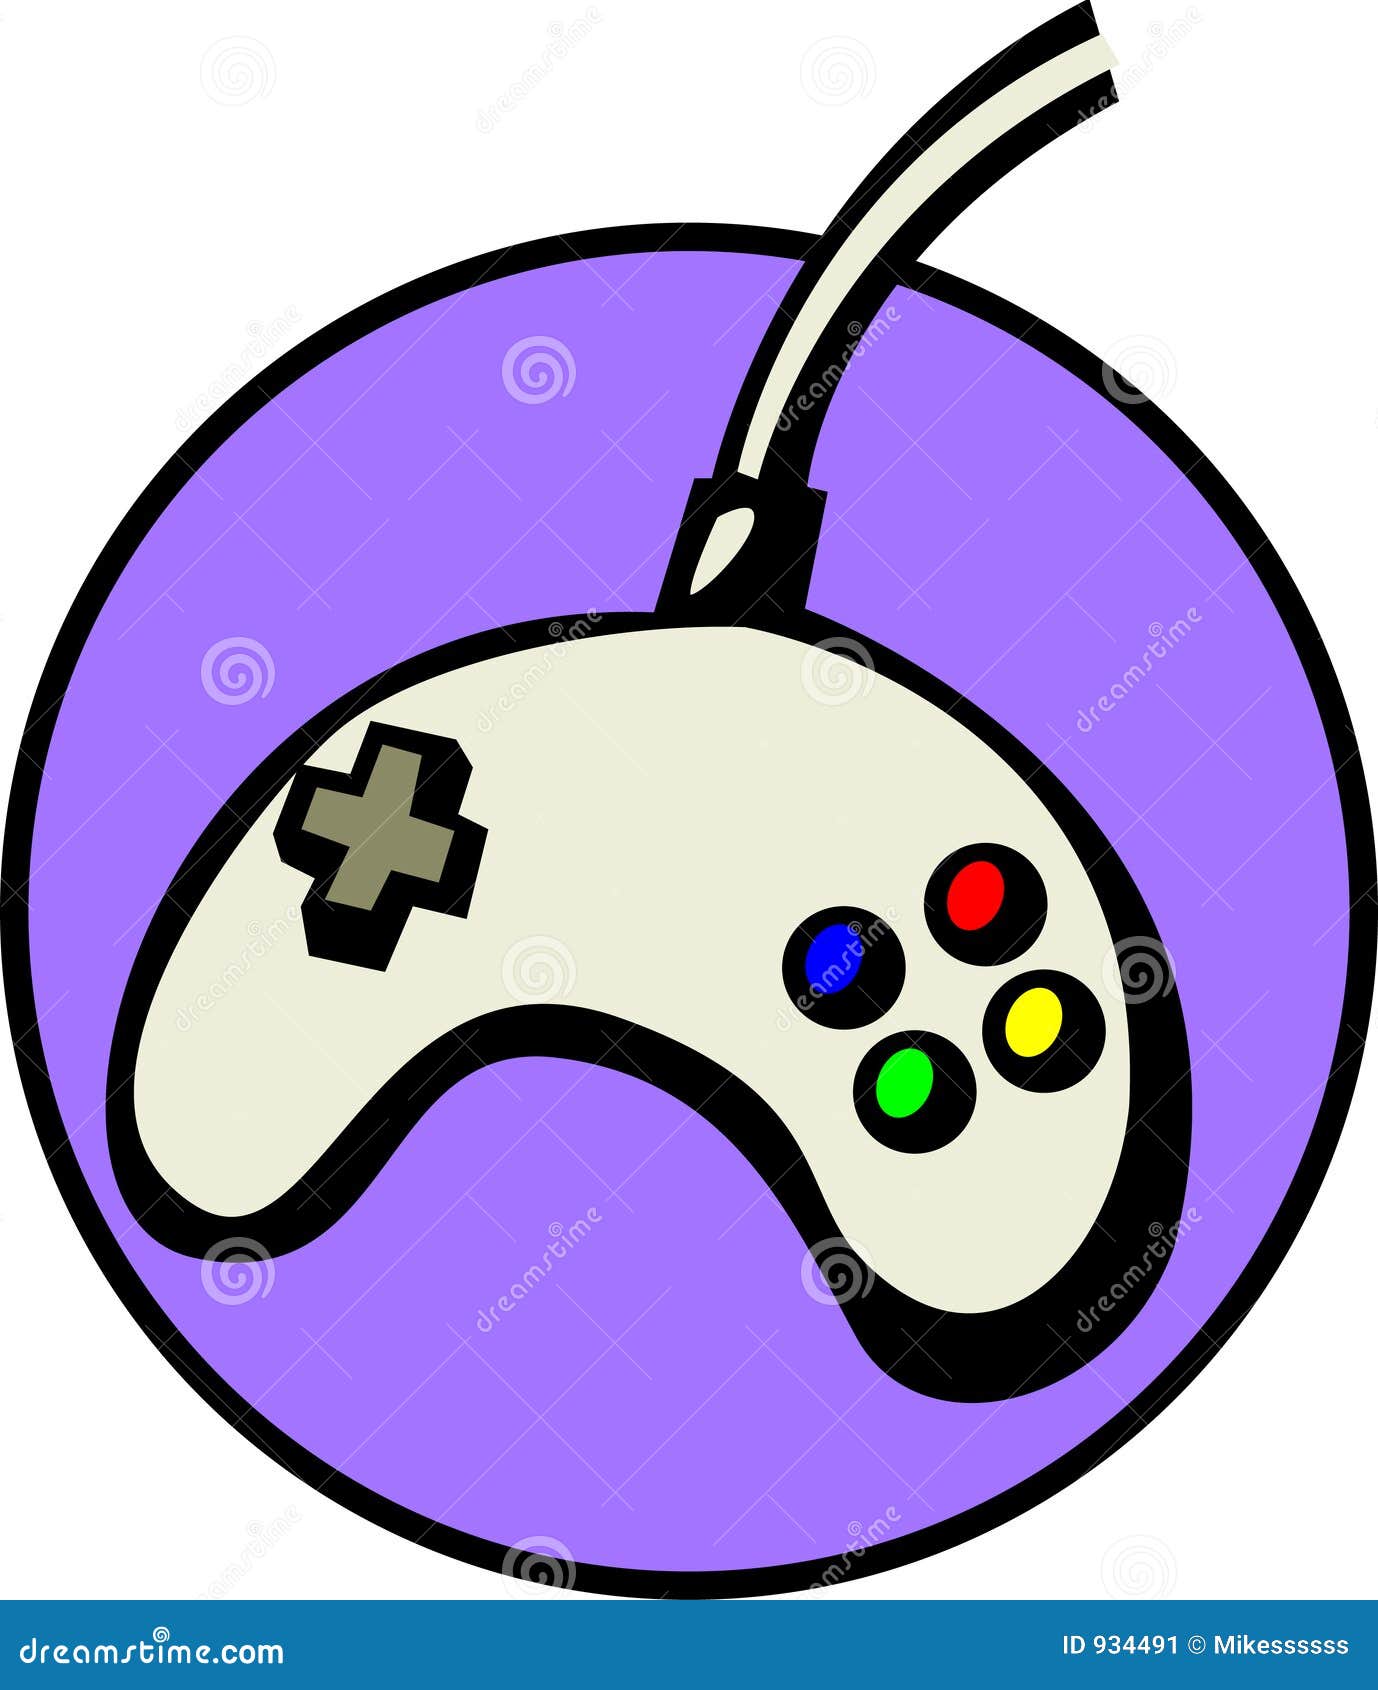 clipart video games - photo #43